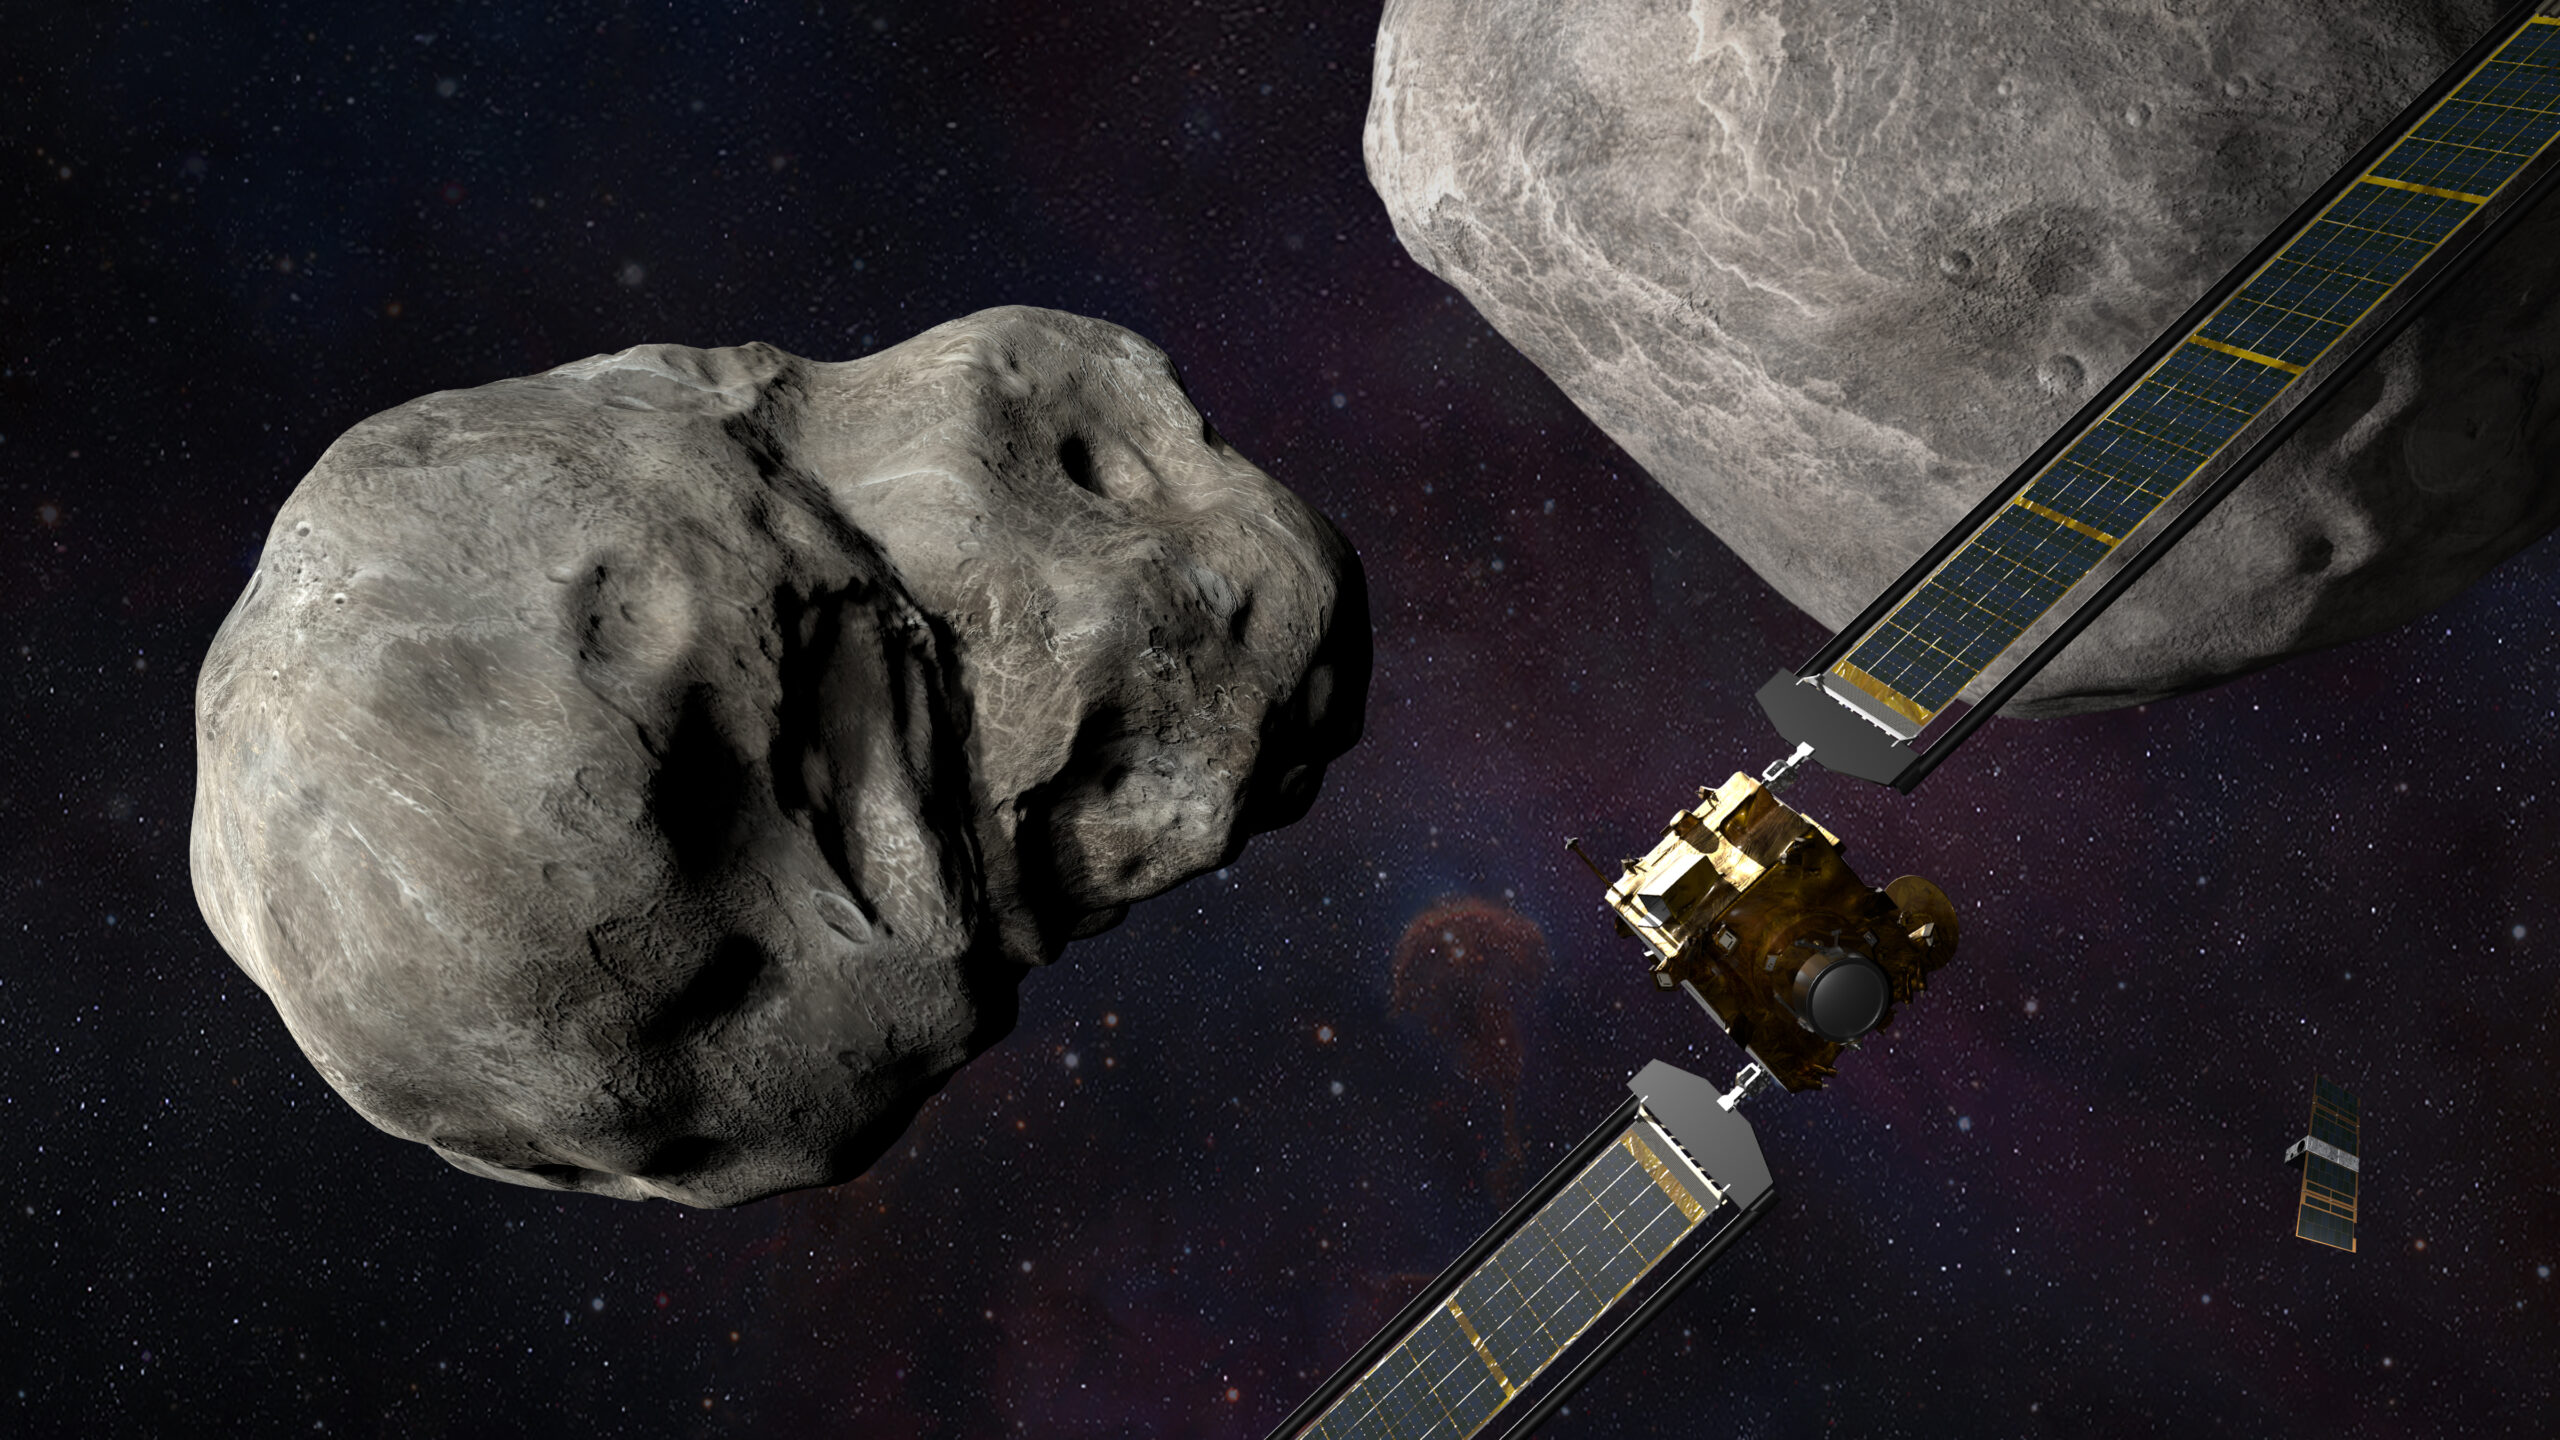 A simulated scenario before the probe hits the asteroid